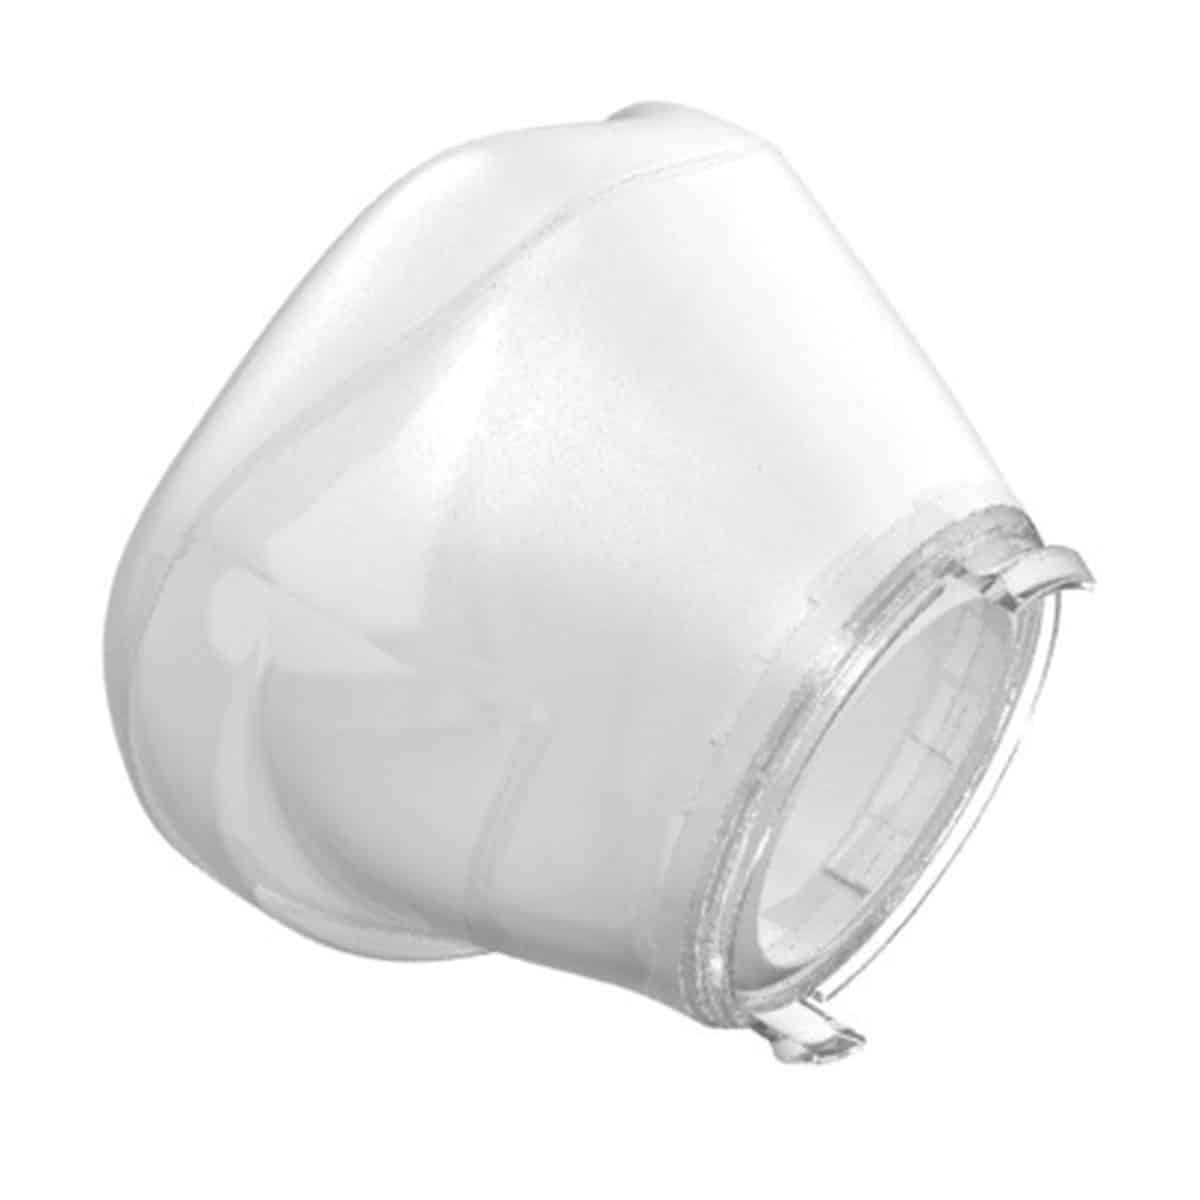 Featured image for “ResMed AirFit N10 Nasal Mask Cushion”